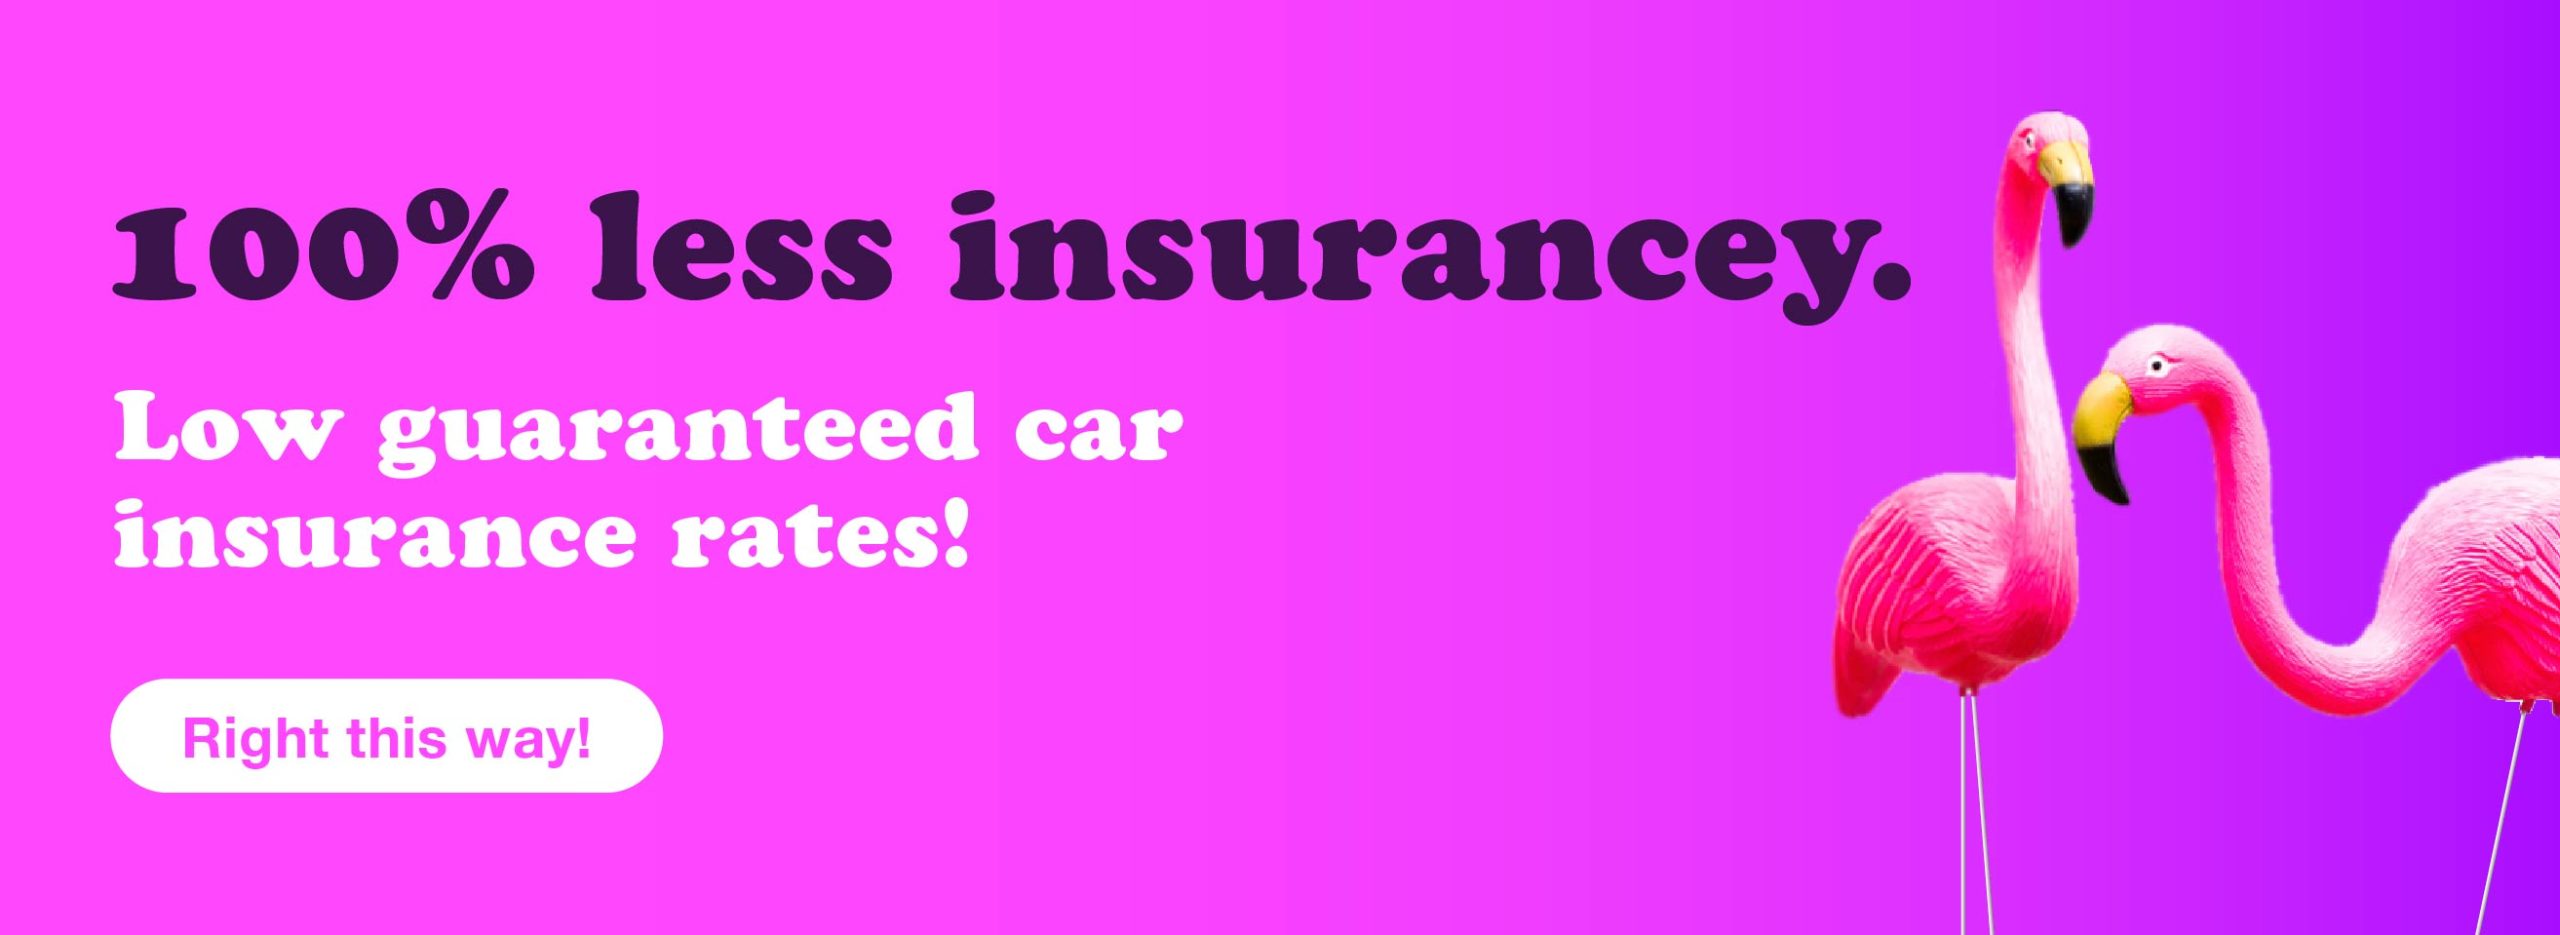 "100% less insurancey" beside two plastic lawn flamingos on a purple background.